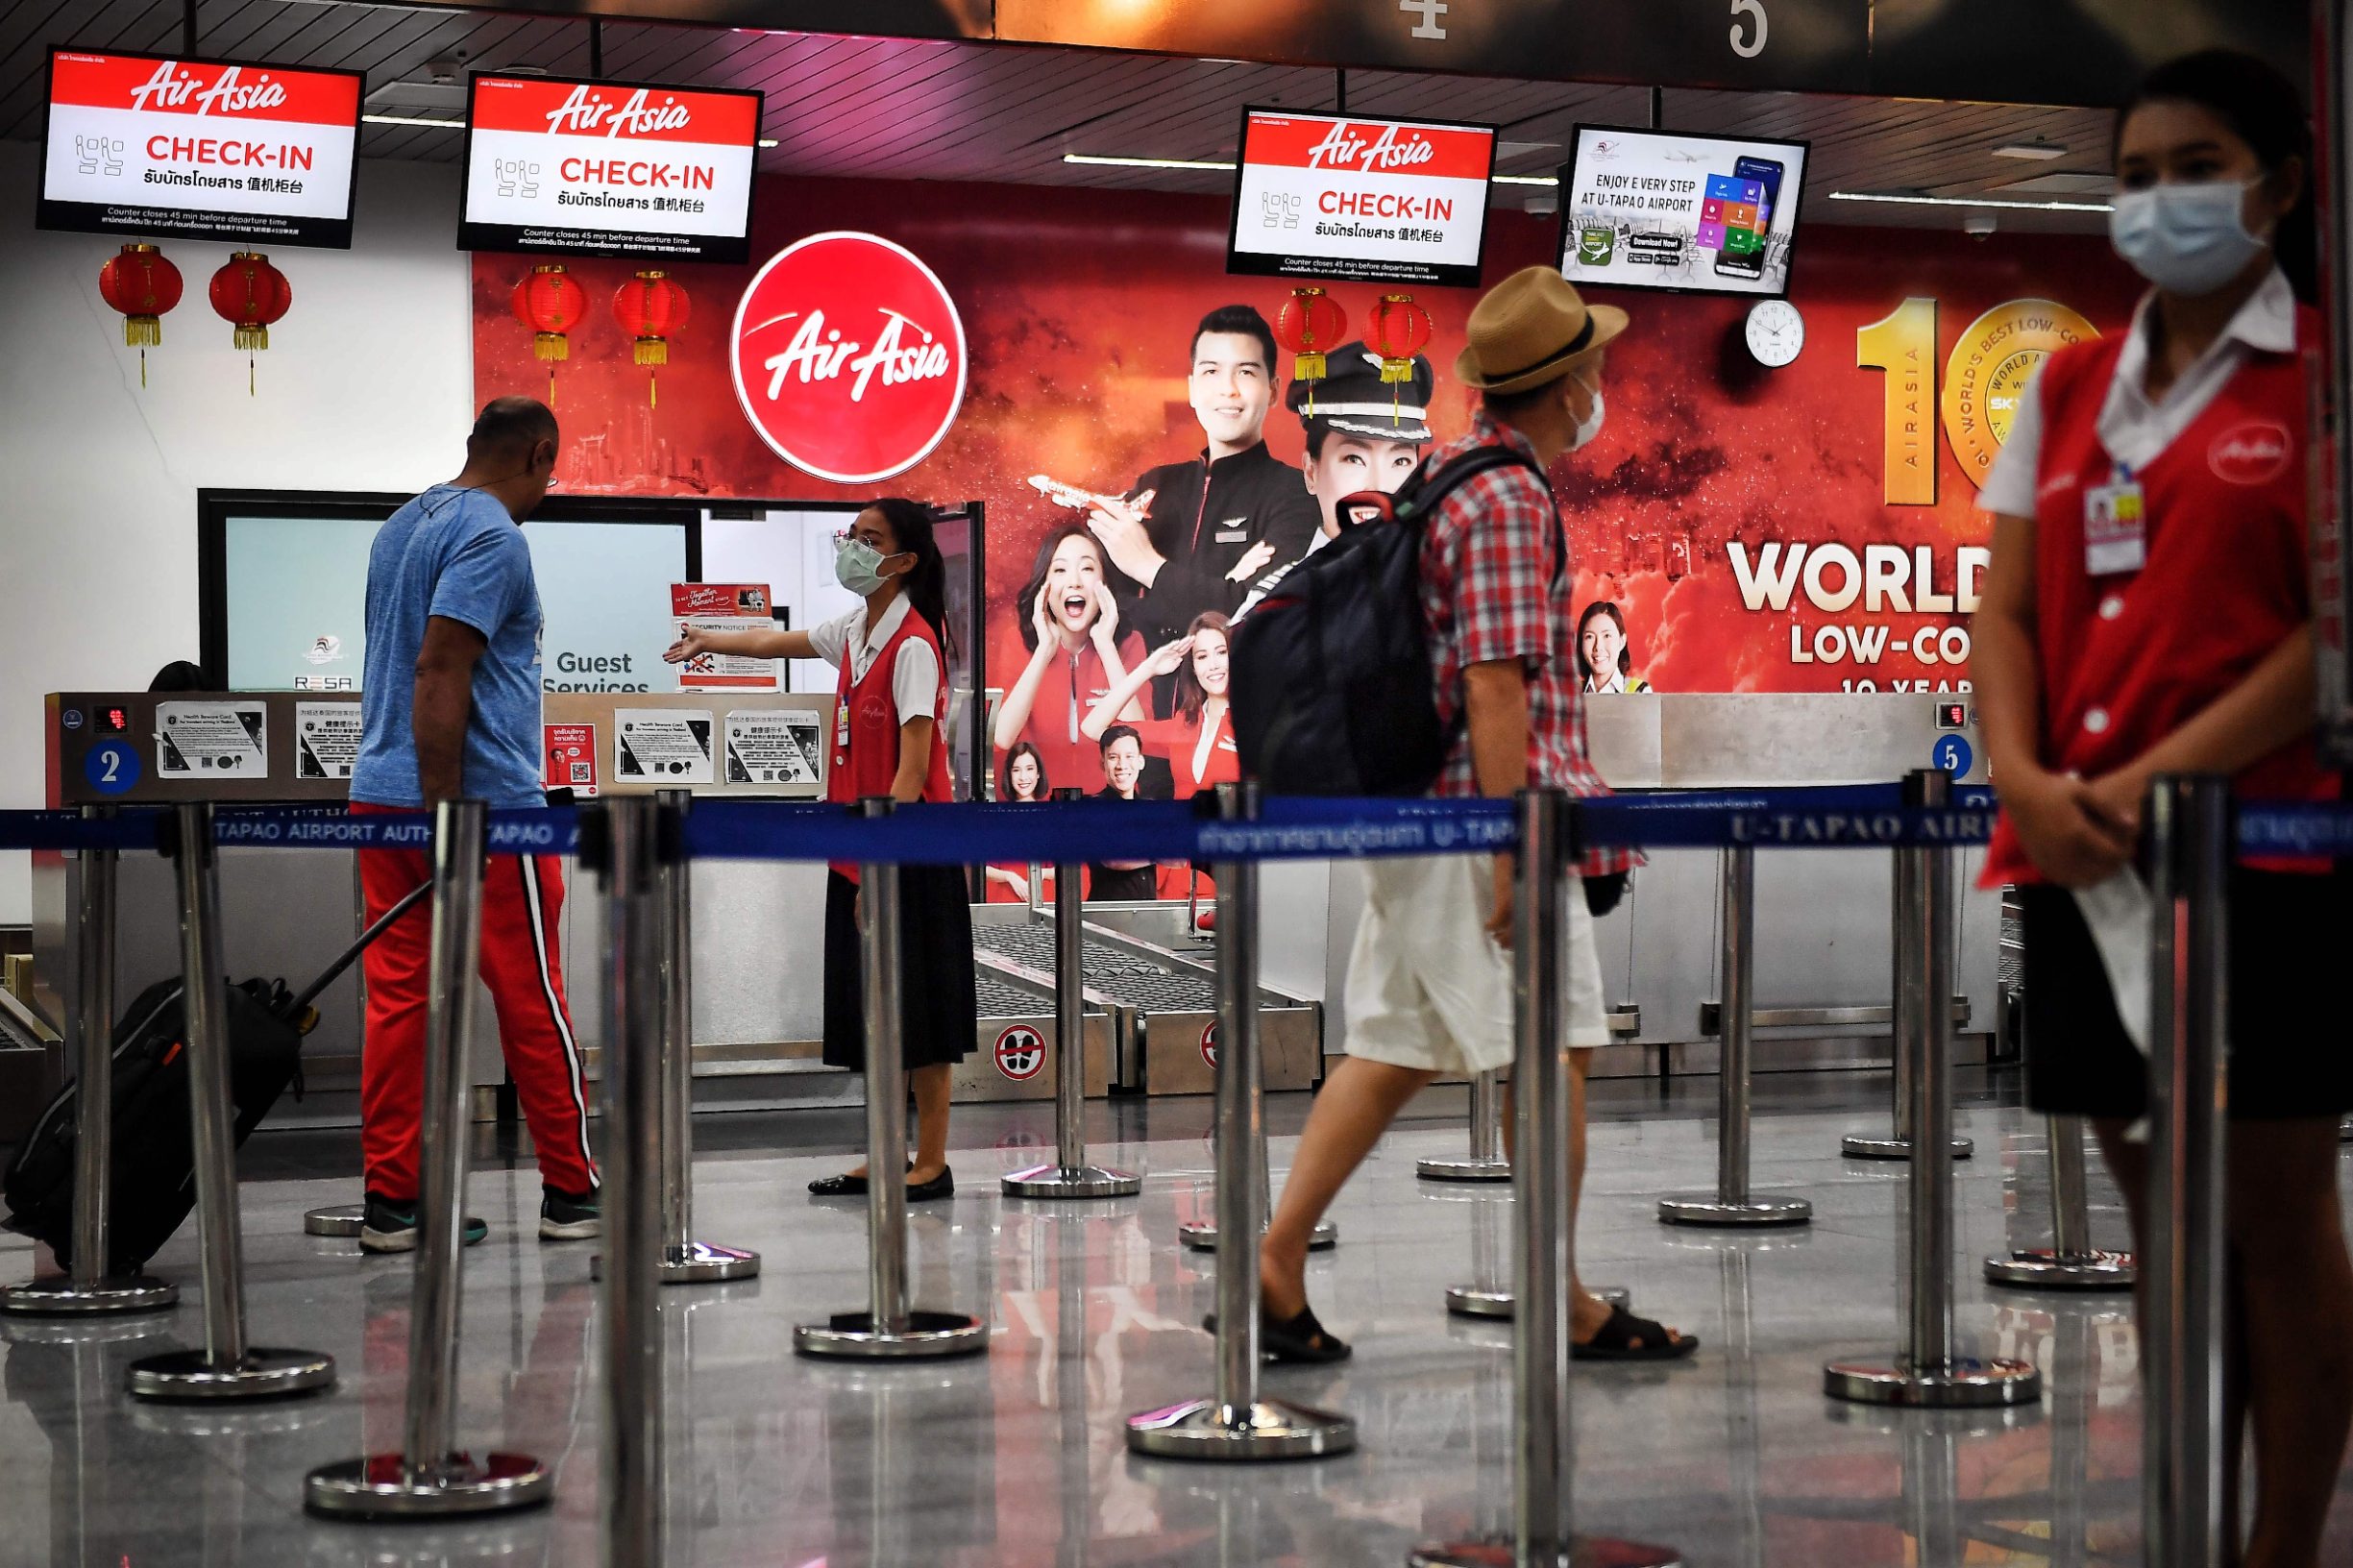 Passengers check in to an AirAsia flight at U-Tapao Airport in Rayong on February 4, 2020, where Thais nationals who had been evacuated from Wuhan, the epicentre of the novel coronavirus outbreak, are expected to arrive. (Photo by Lillian SUWANRUMPHA / AFP)